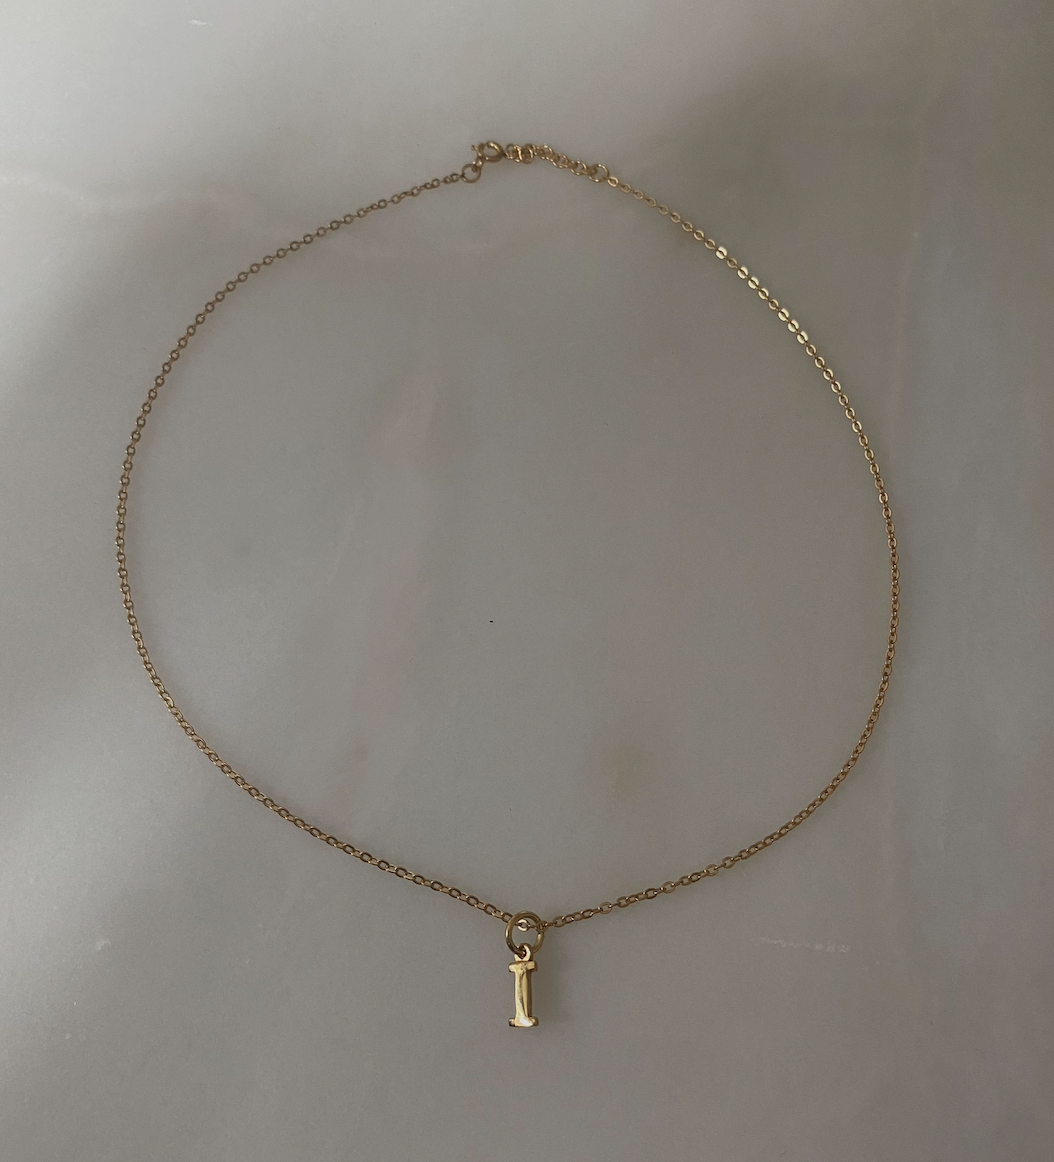 18k Gold Plated Petite Initial Necklace with 38cm Adjustable Gold Chain